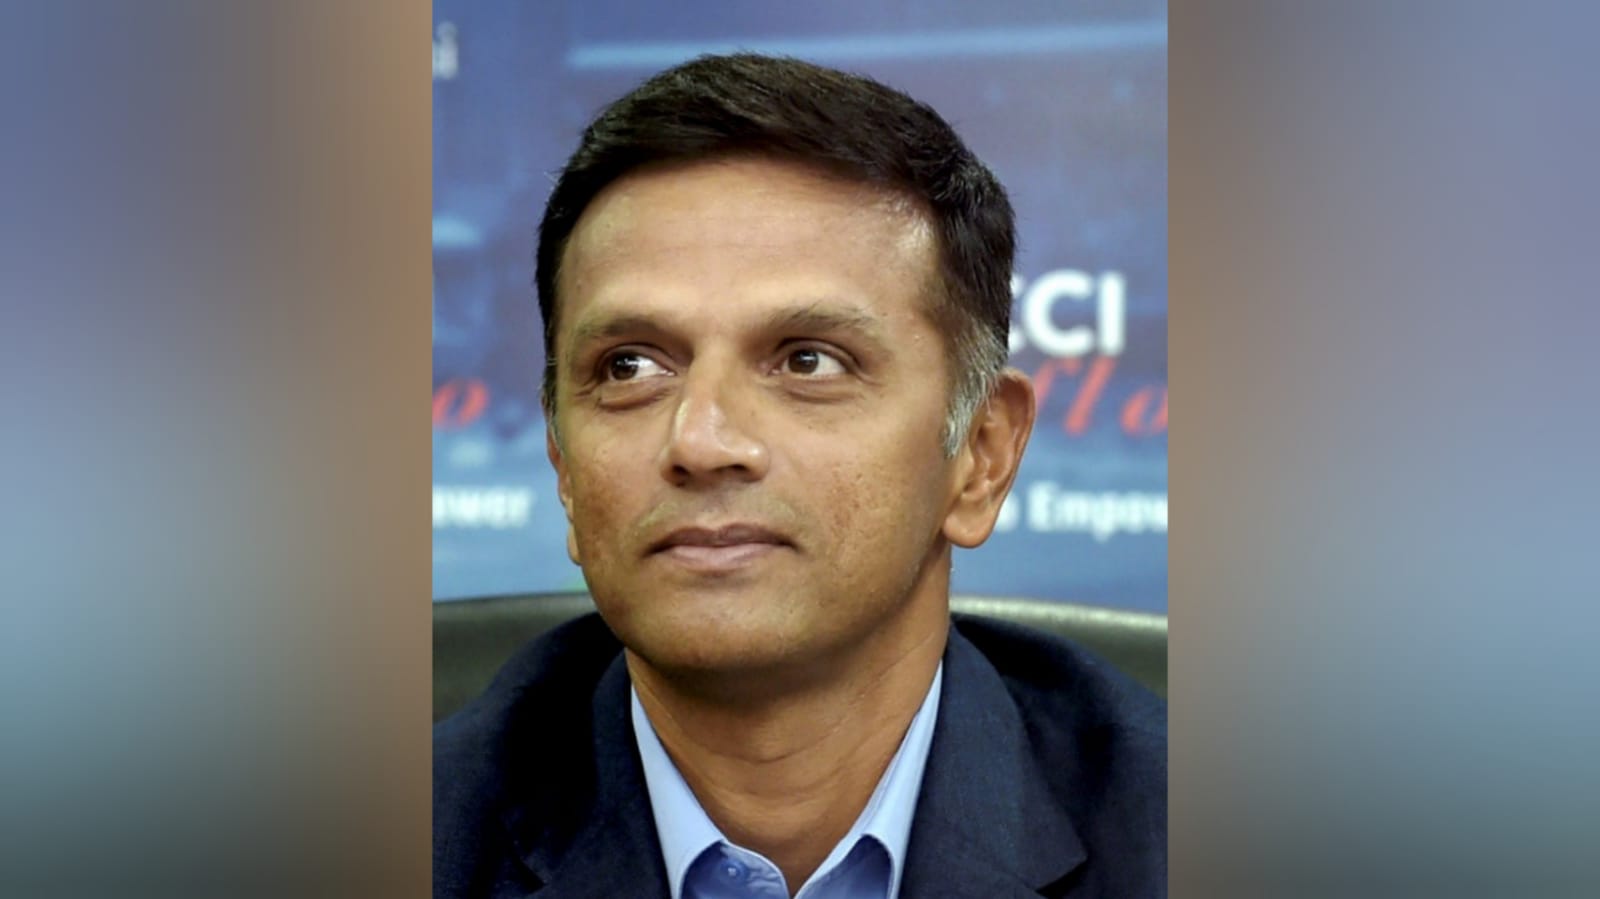 Rahul Dravid was not willing to coach Team India, says Sourav Ganguly